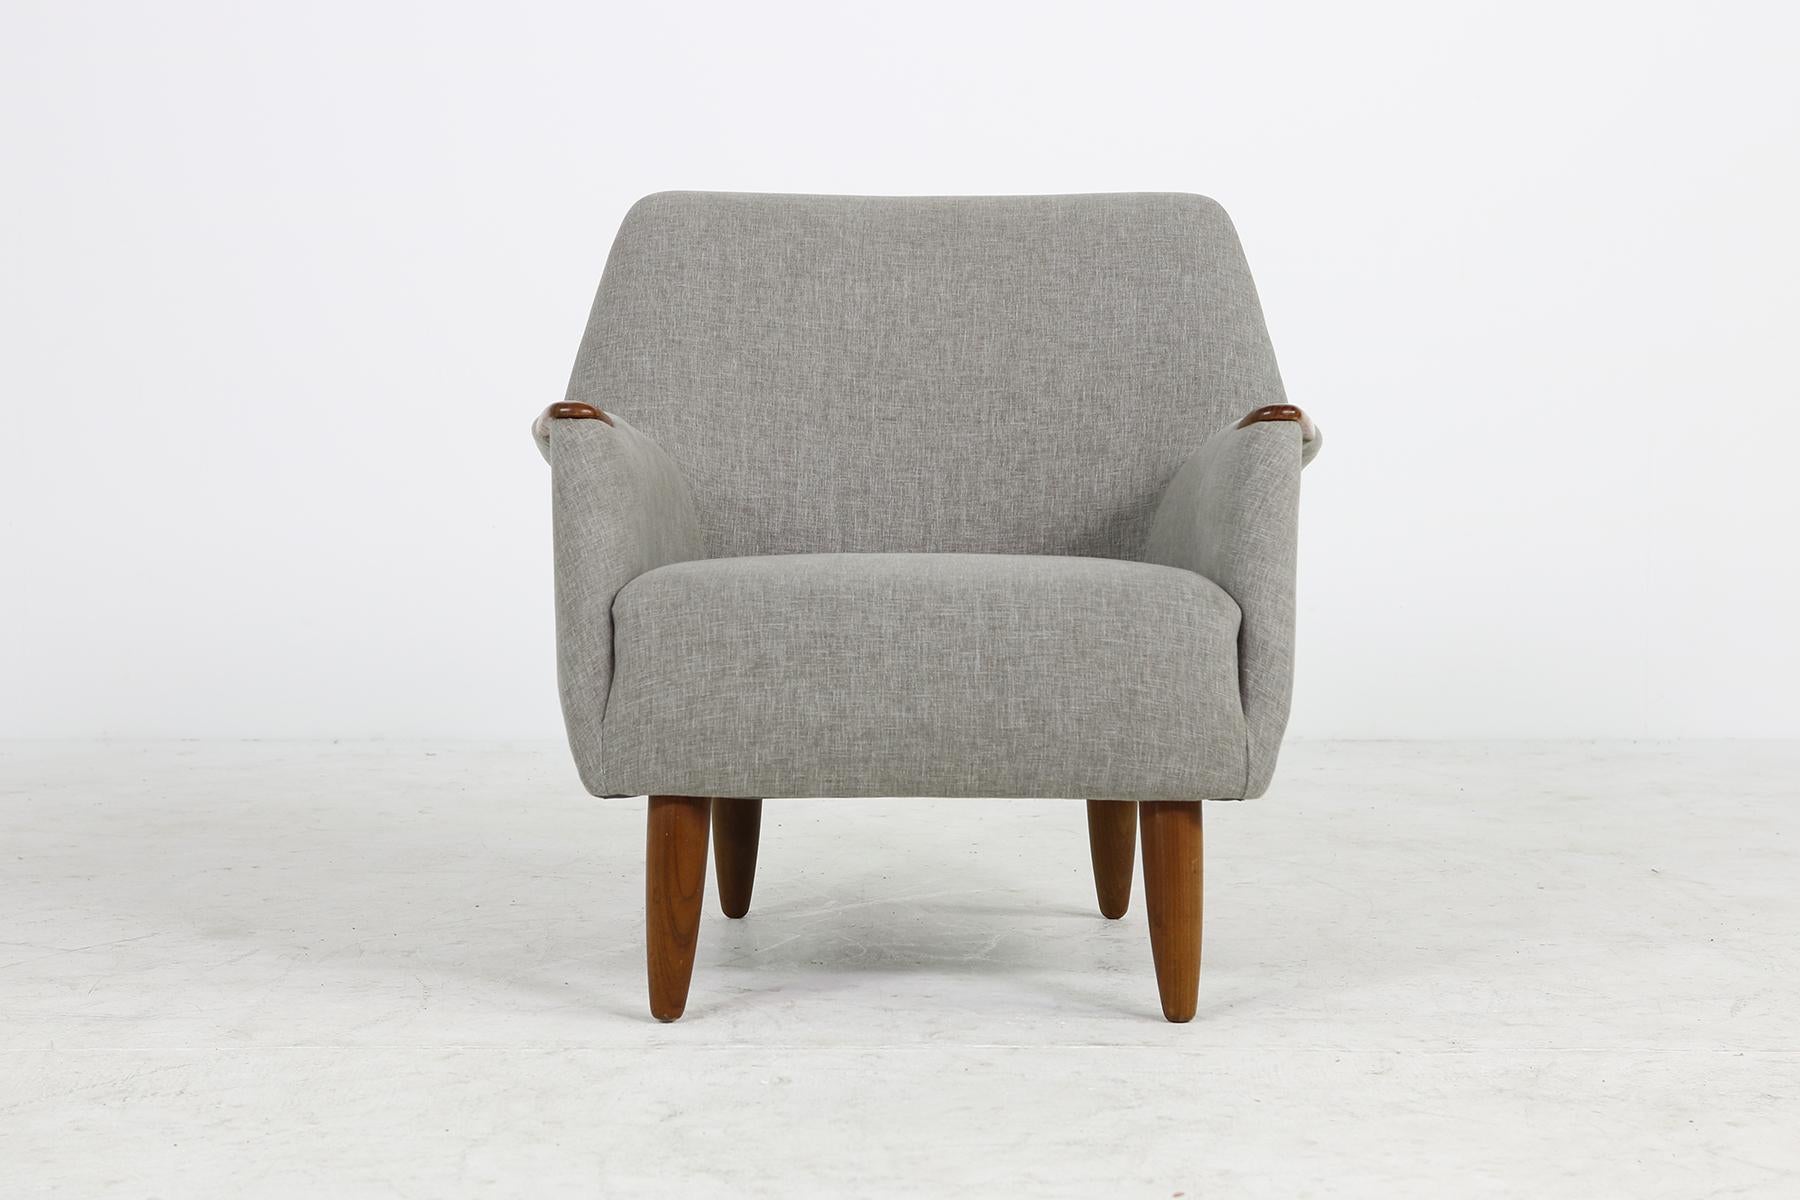 Beautiful and rare Danish modern 1960s armchair, lounge chair, design attributed to Kurt Ostervig, reupholstered and covered with new grey woven fabric, solid teak legs, nice details like the teak armrest end pieces, very good condition, since